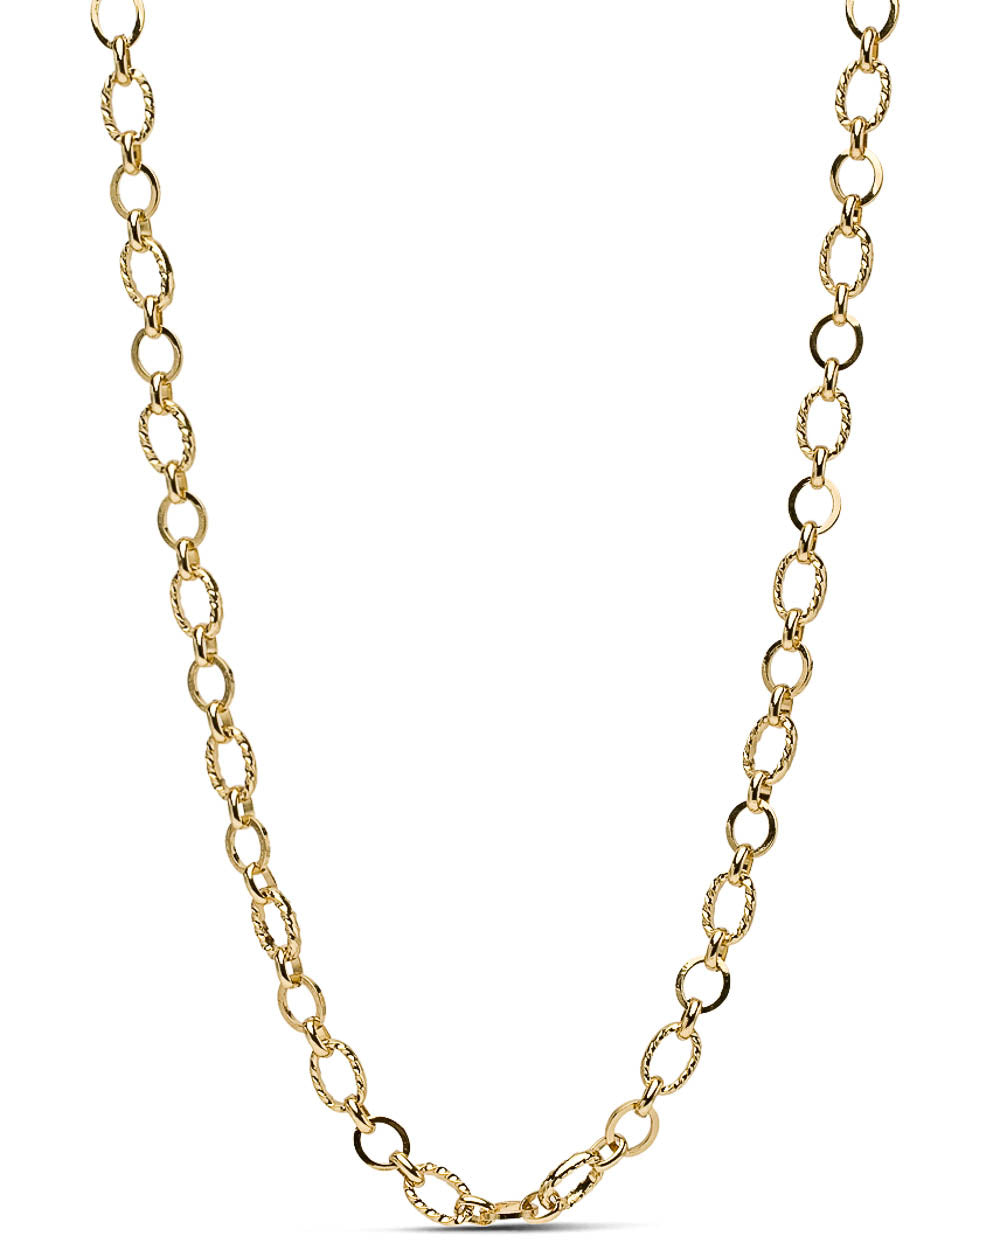 Yellow Gold Textured Chain Link Necklace